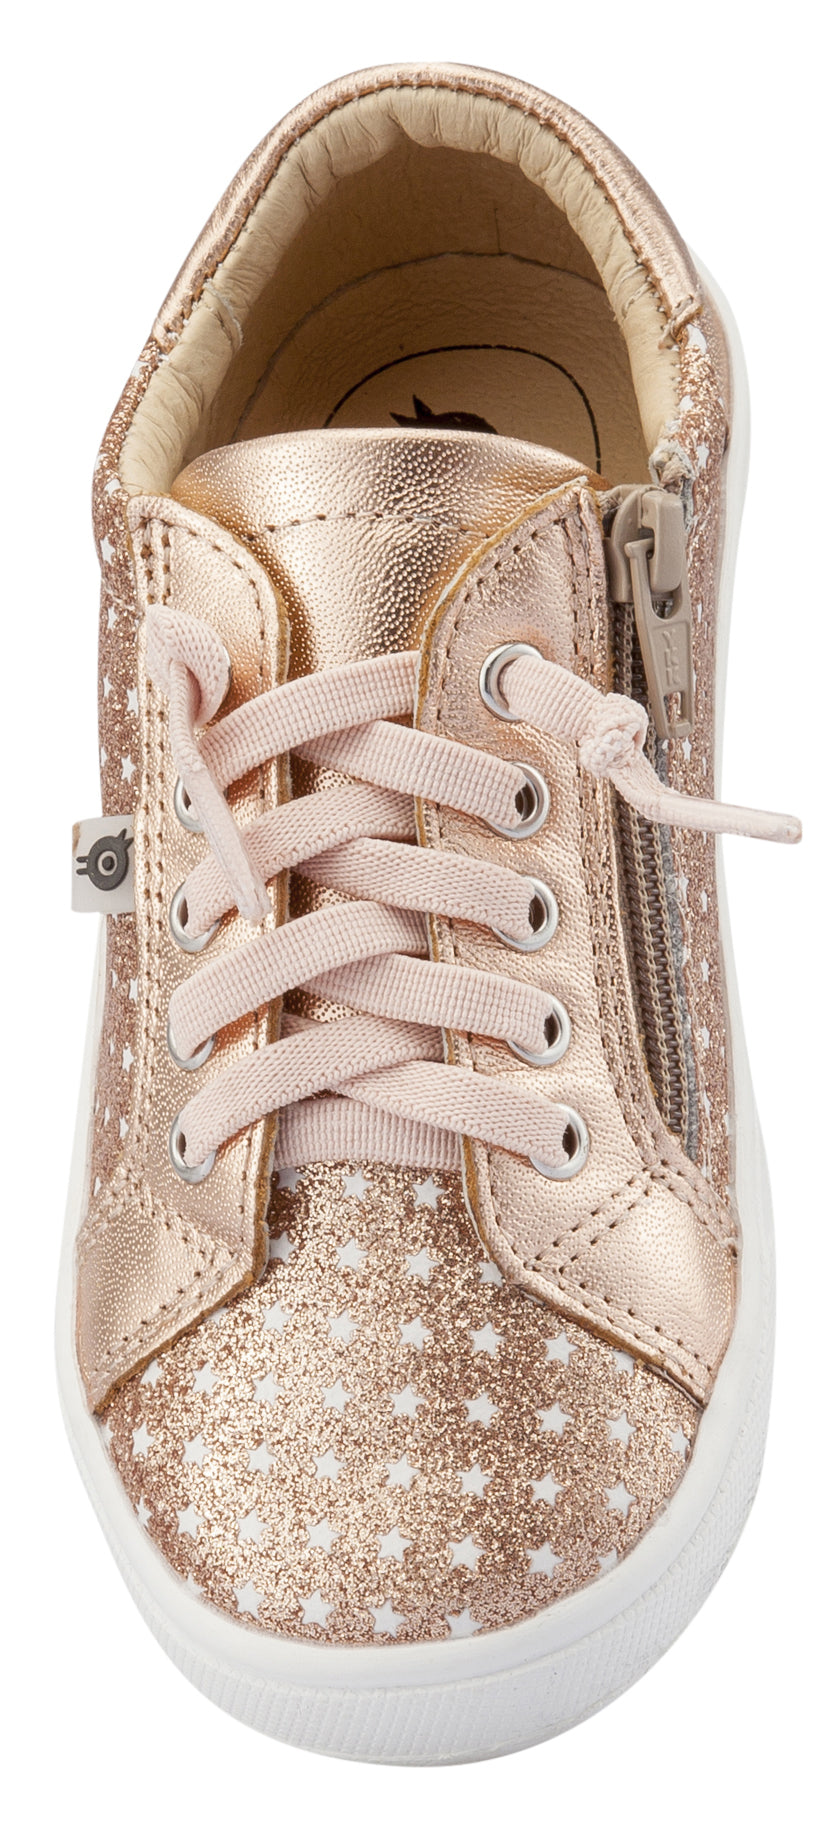 Old Soles Girl's Star Jogger Sneakers, Star Glam Copper